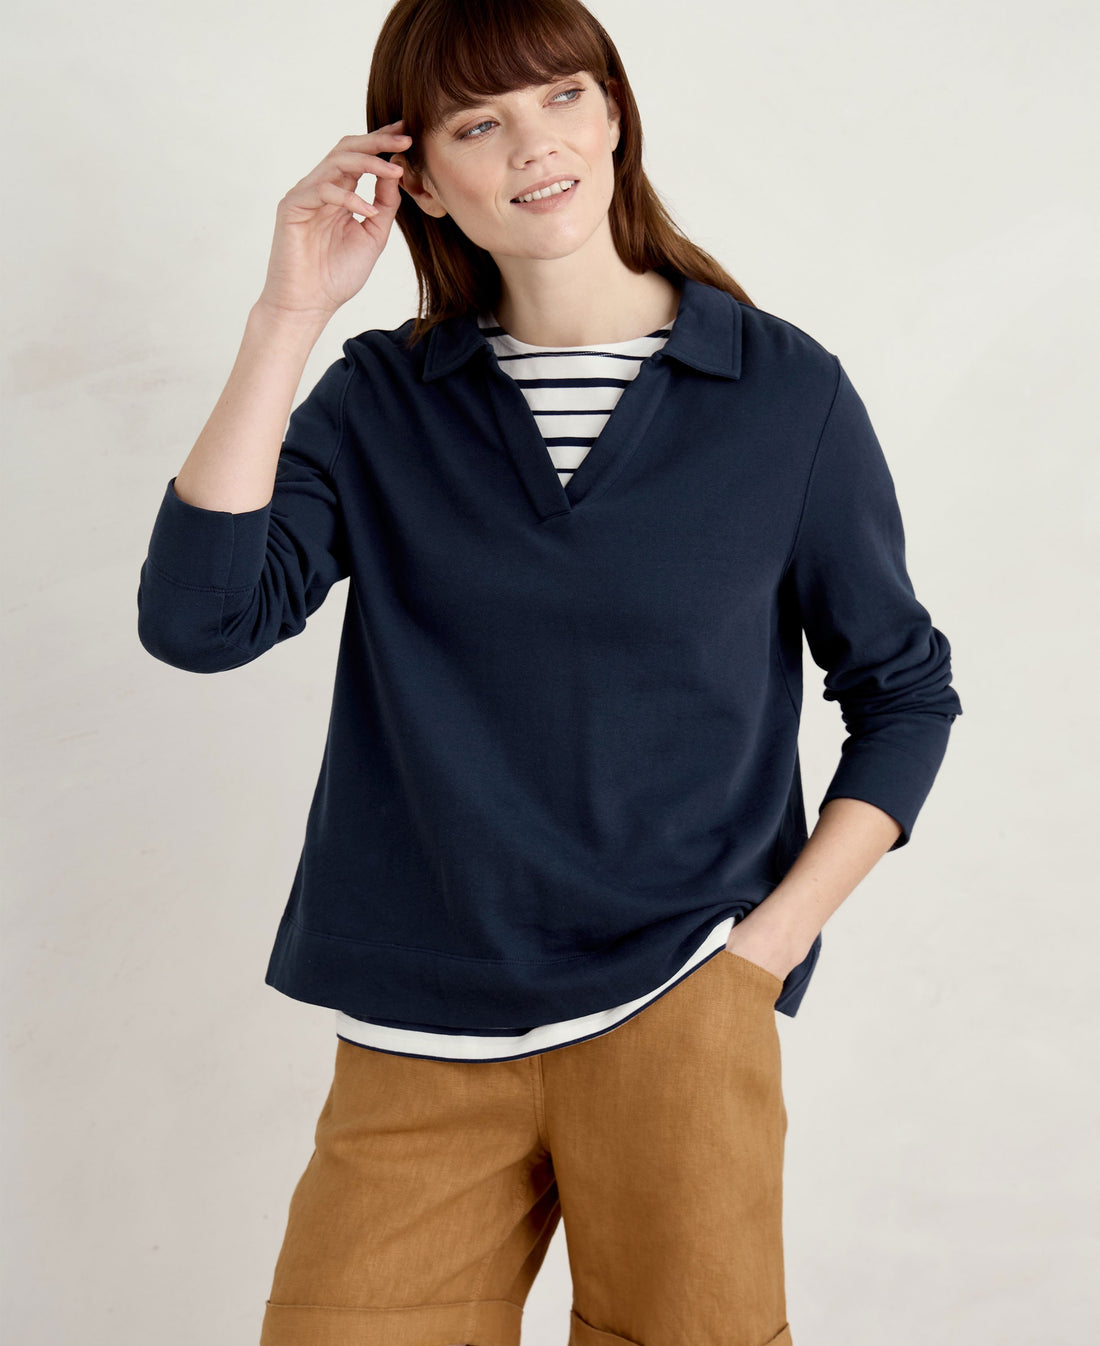 Clear Wing V-Neck Collared Sweatshirt - Maritime